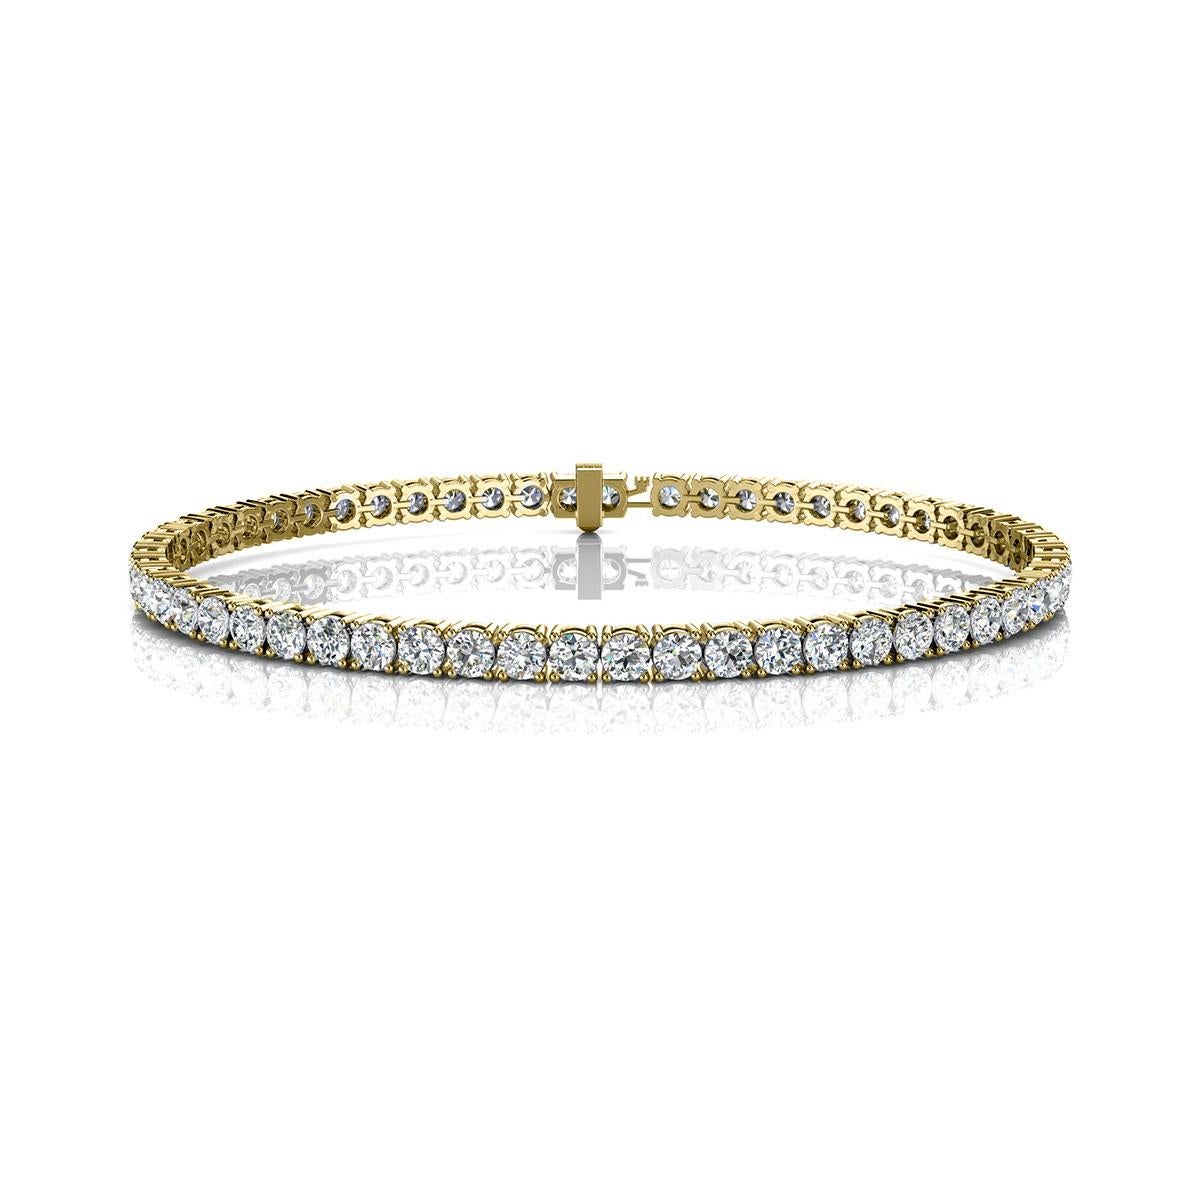 A timeless four prongs diamonds tennis bracelet. Experience the Difference!

Product details: 

Center Gemstone Type: NATURAL DIAMOND
Center Gemstone Color: WHITE
Center Gemstone Shape: ROUND
Center Diamond Carat Weight: 5
Metal: 18K Yellow